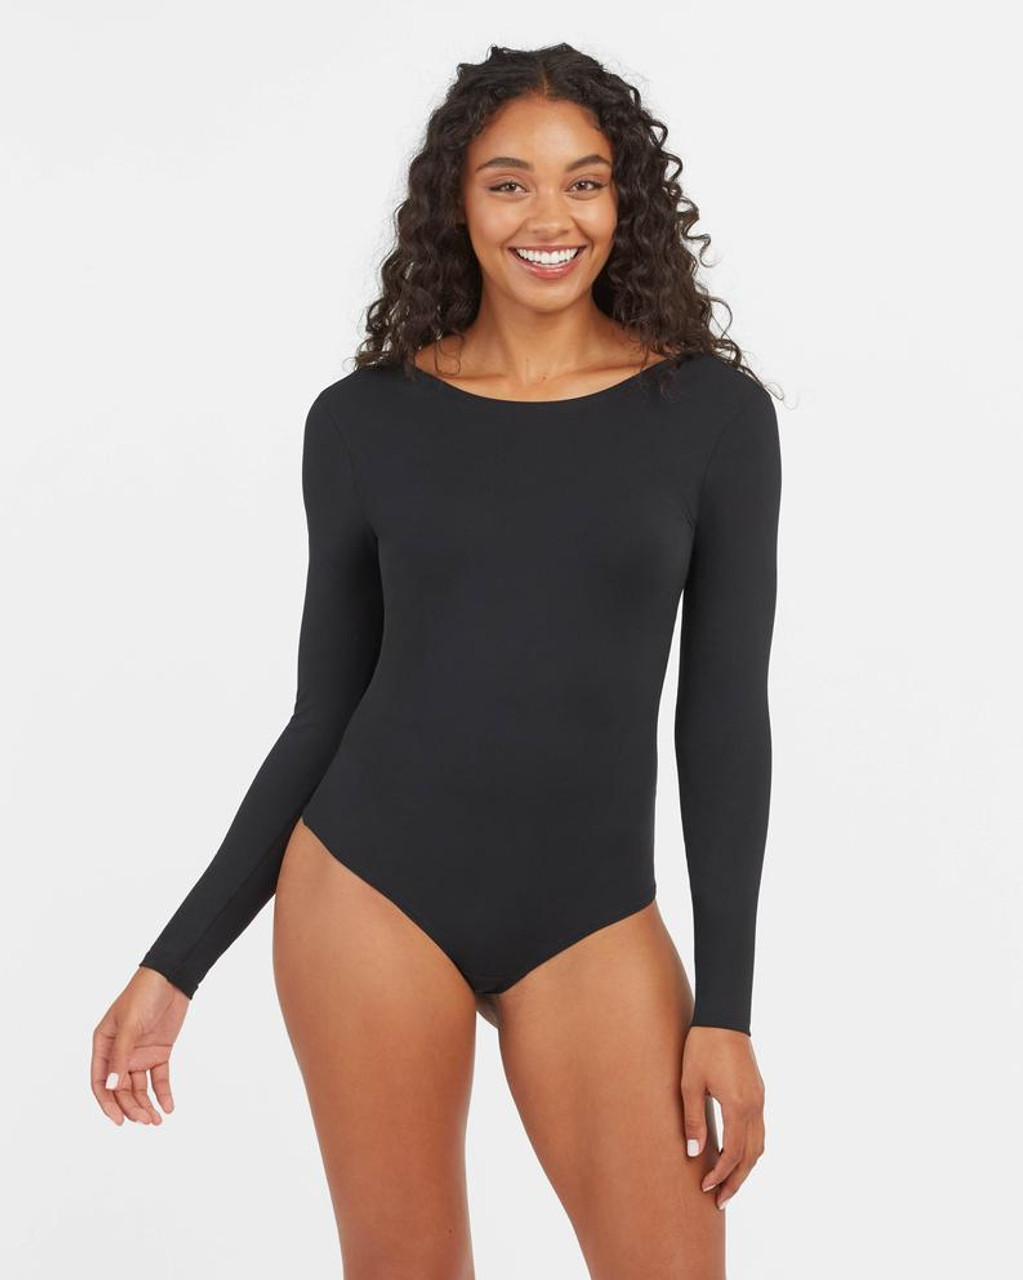 SPANX Products - Monkee's of Raleigh